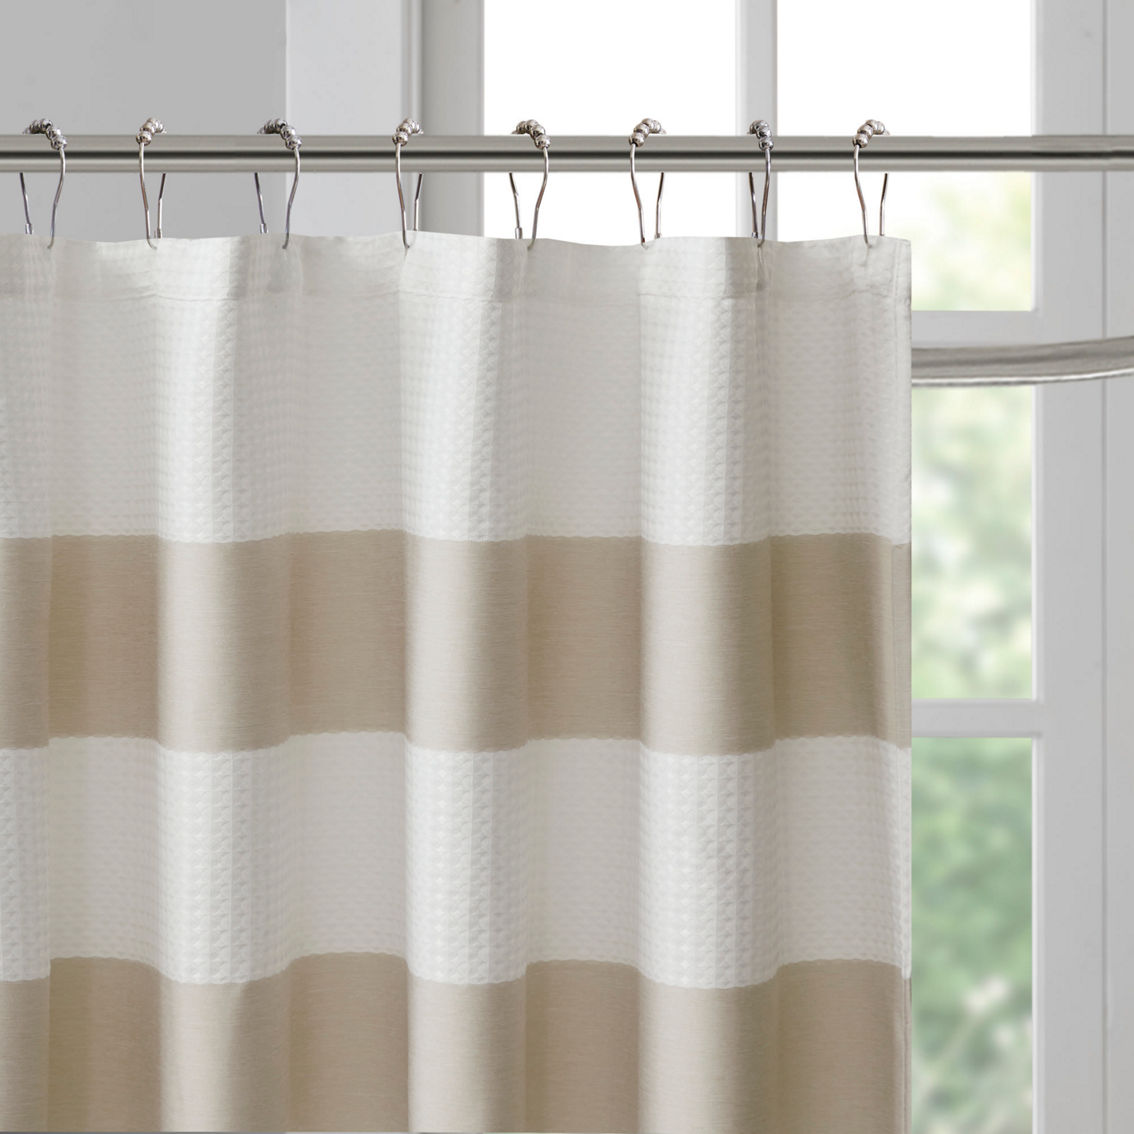 Madison Park Spa Waffle Shower Curtain with 3M Treatment 72 X 72 in. - Image 4 of 5